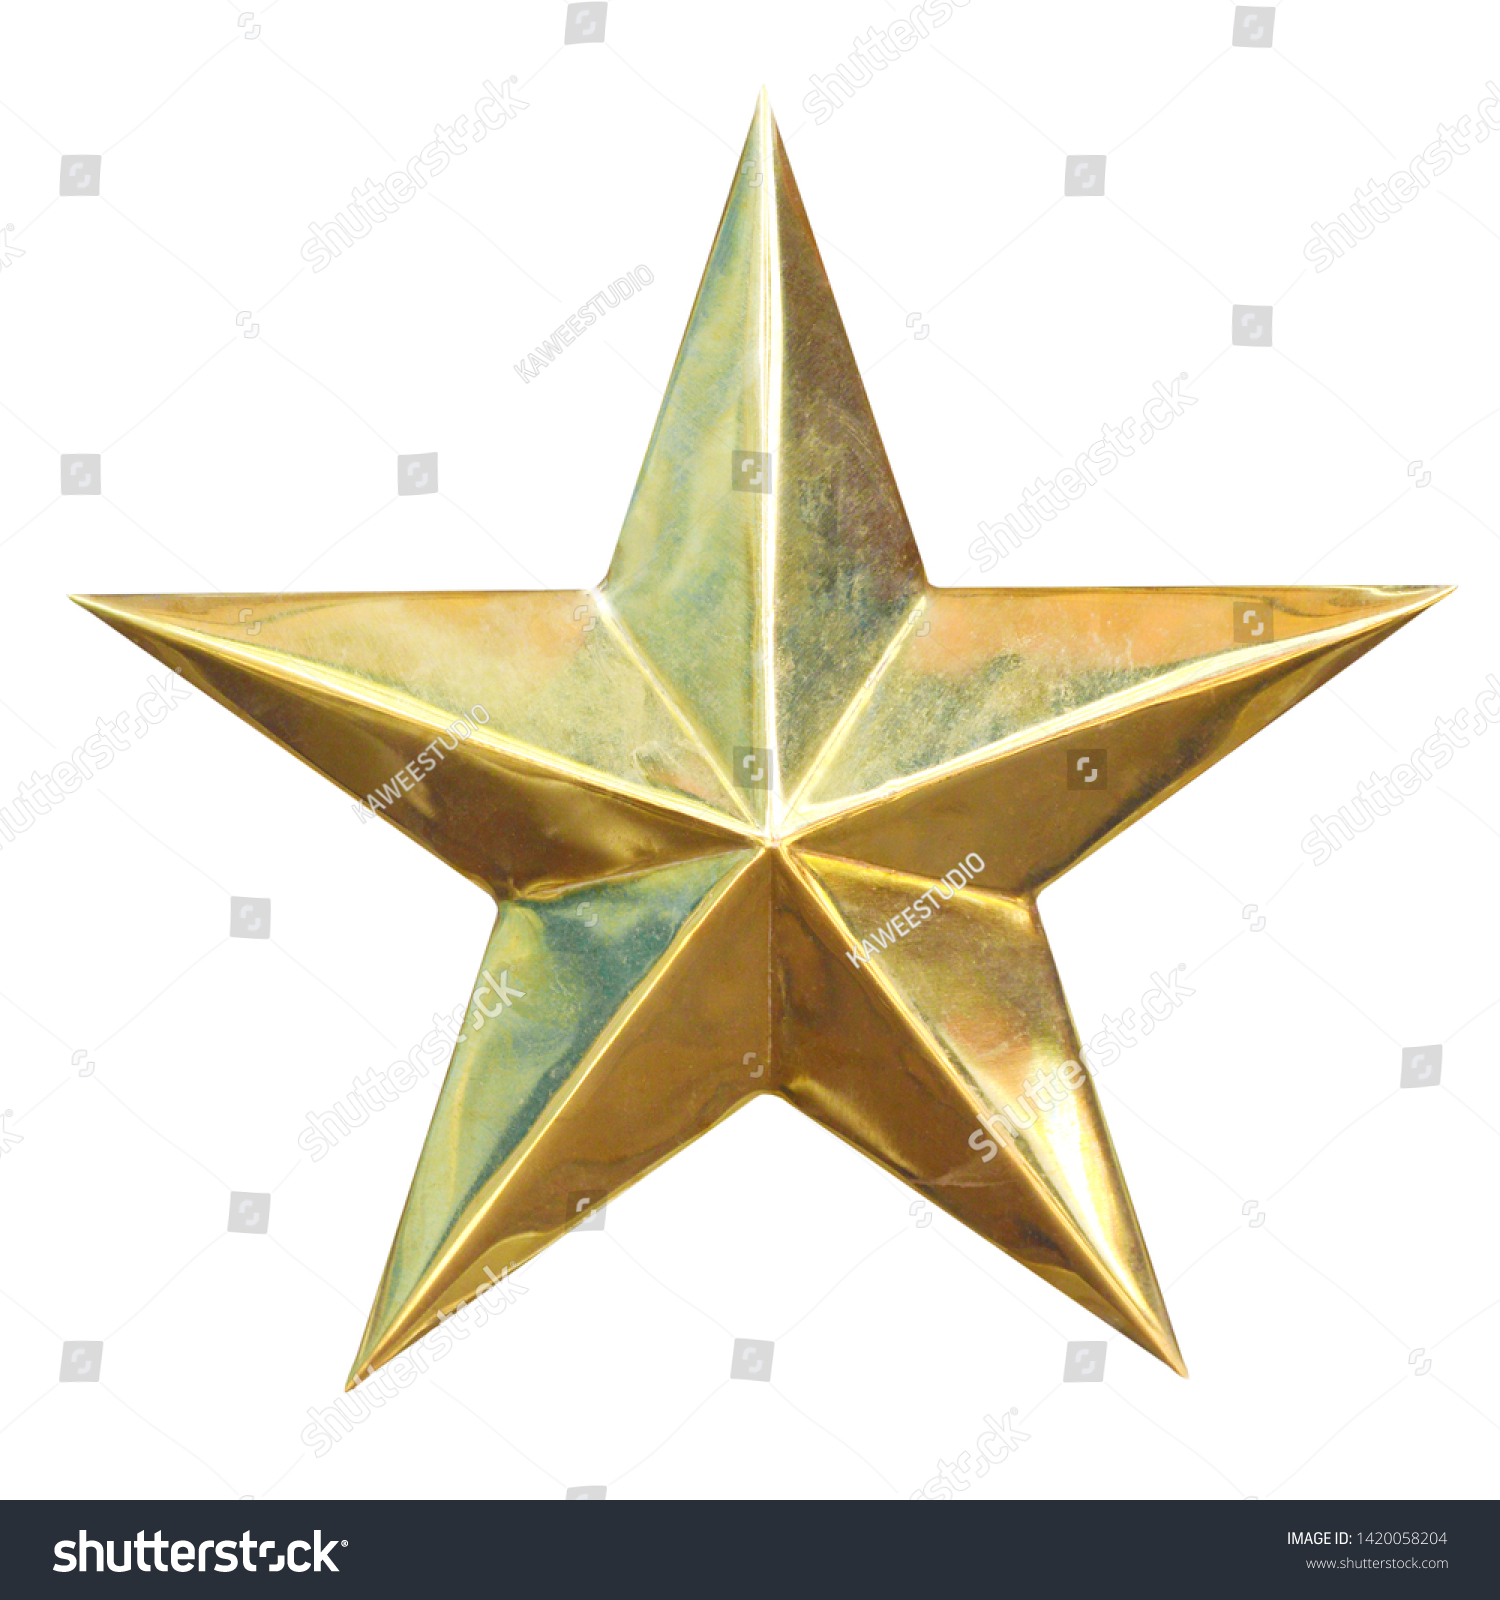 Golden Christmas Star isolated on white Background, clipping path. #1420058204